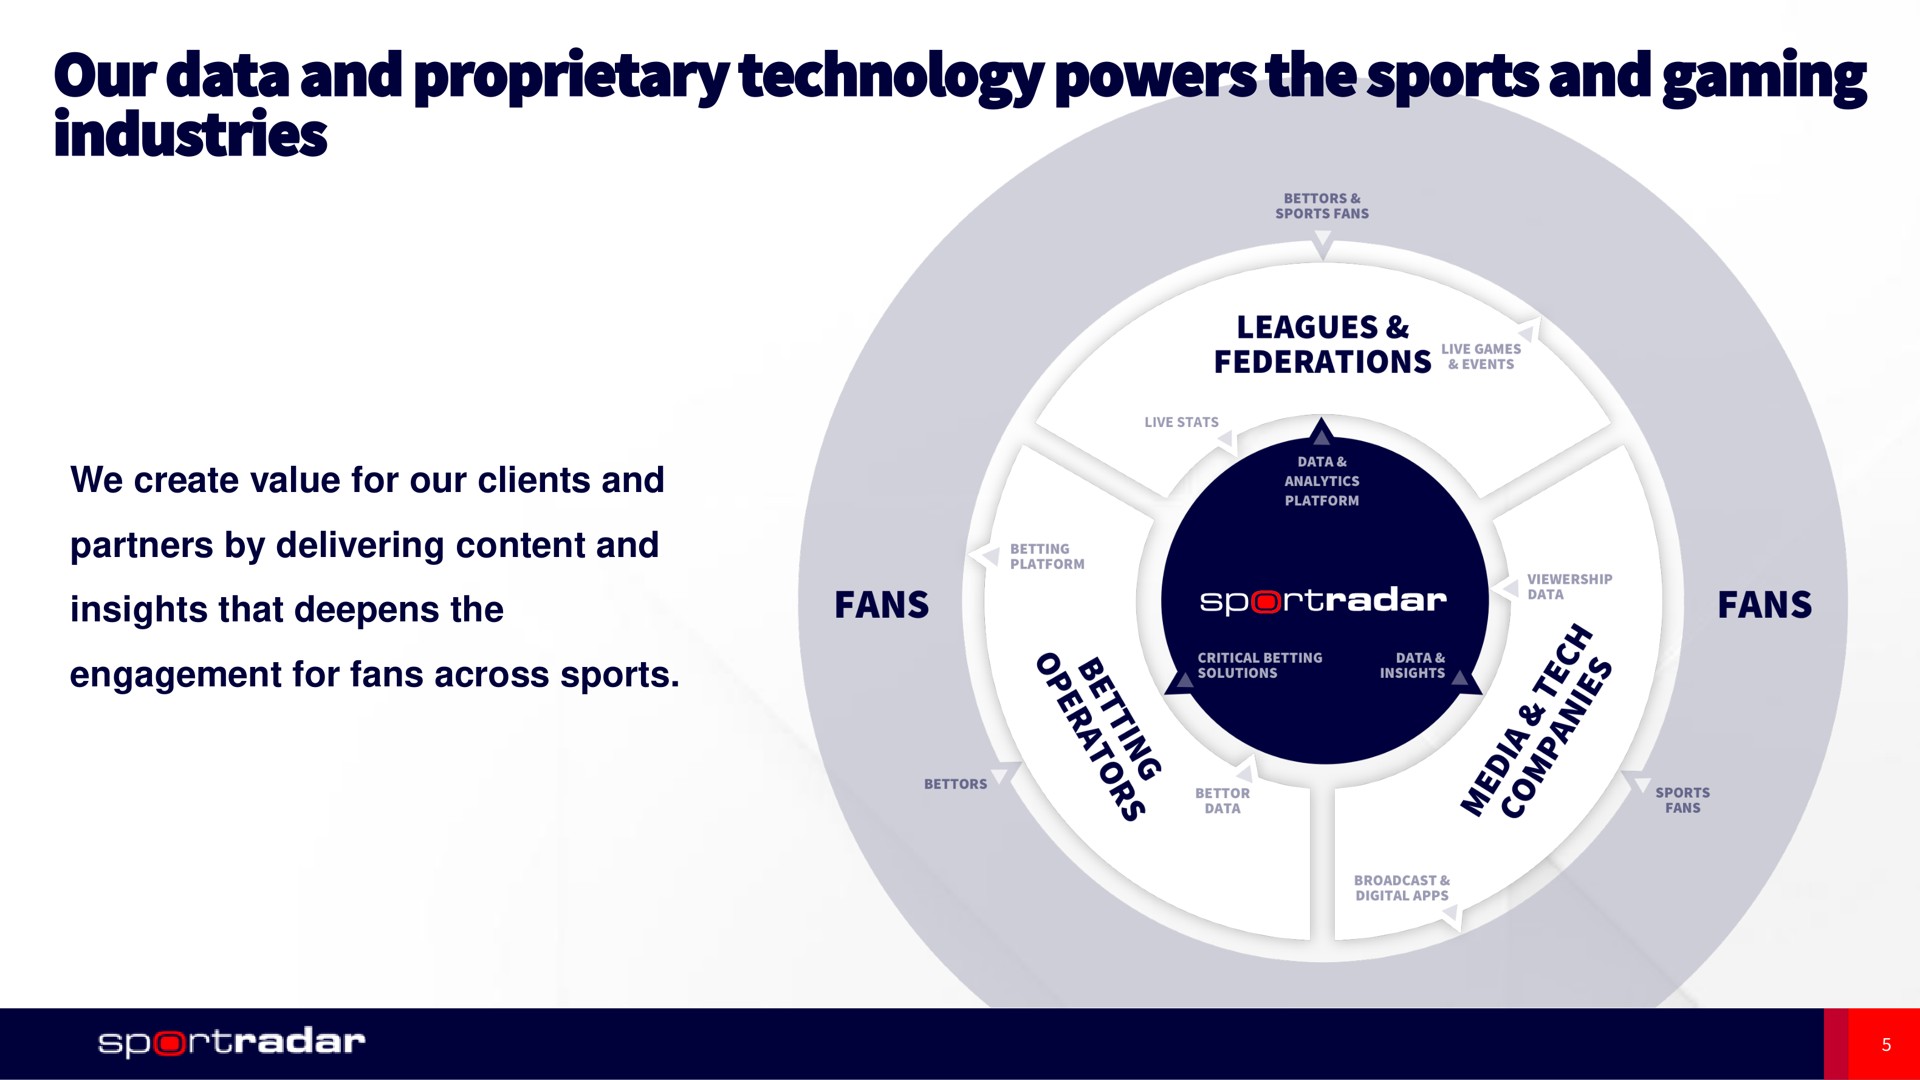 our data and proprietary technology powers the sports and gaming industries | Sportradar